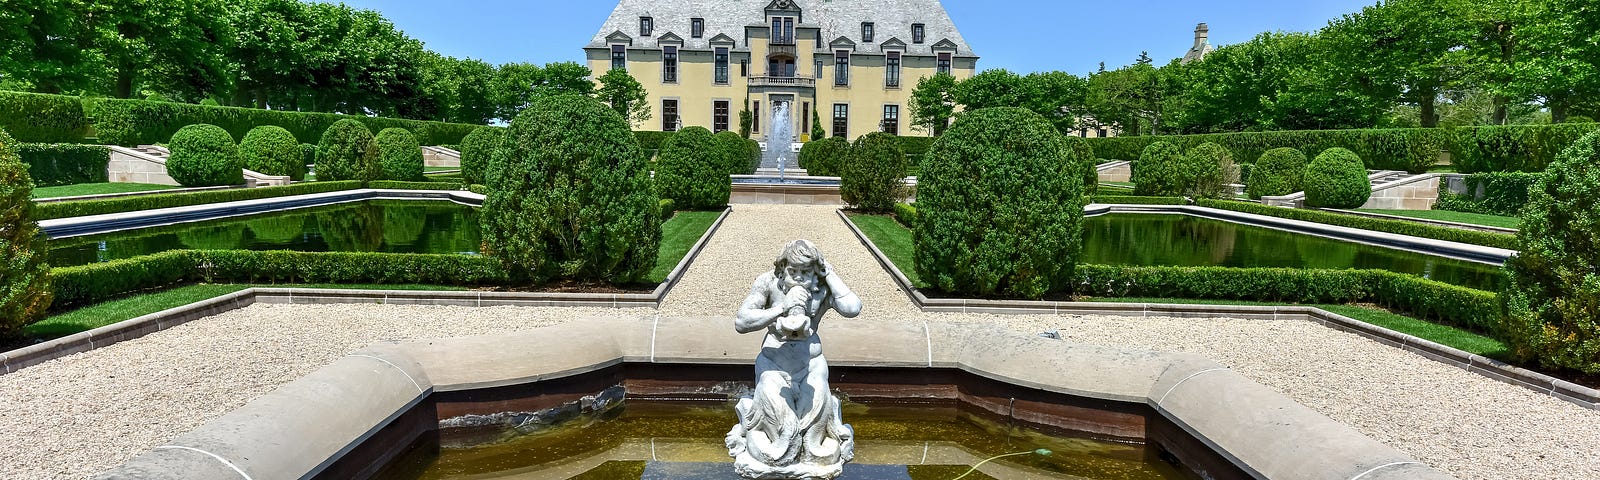 Front view of Oheka Castle with elaborate statue in the middle of a fountain